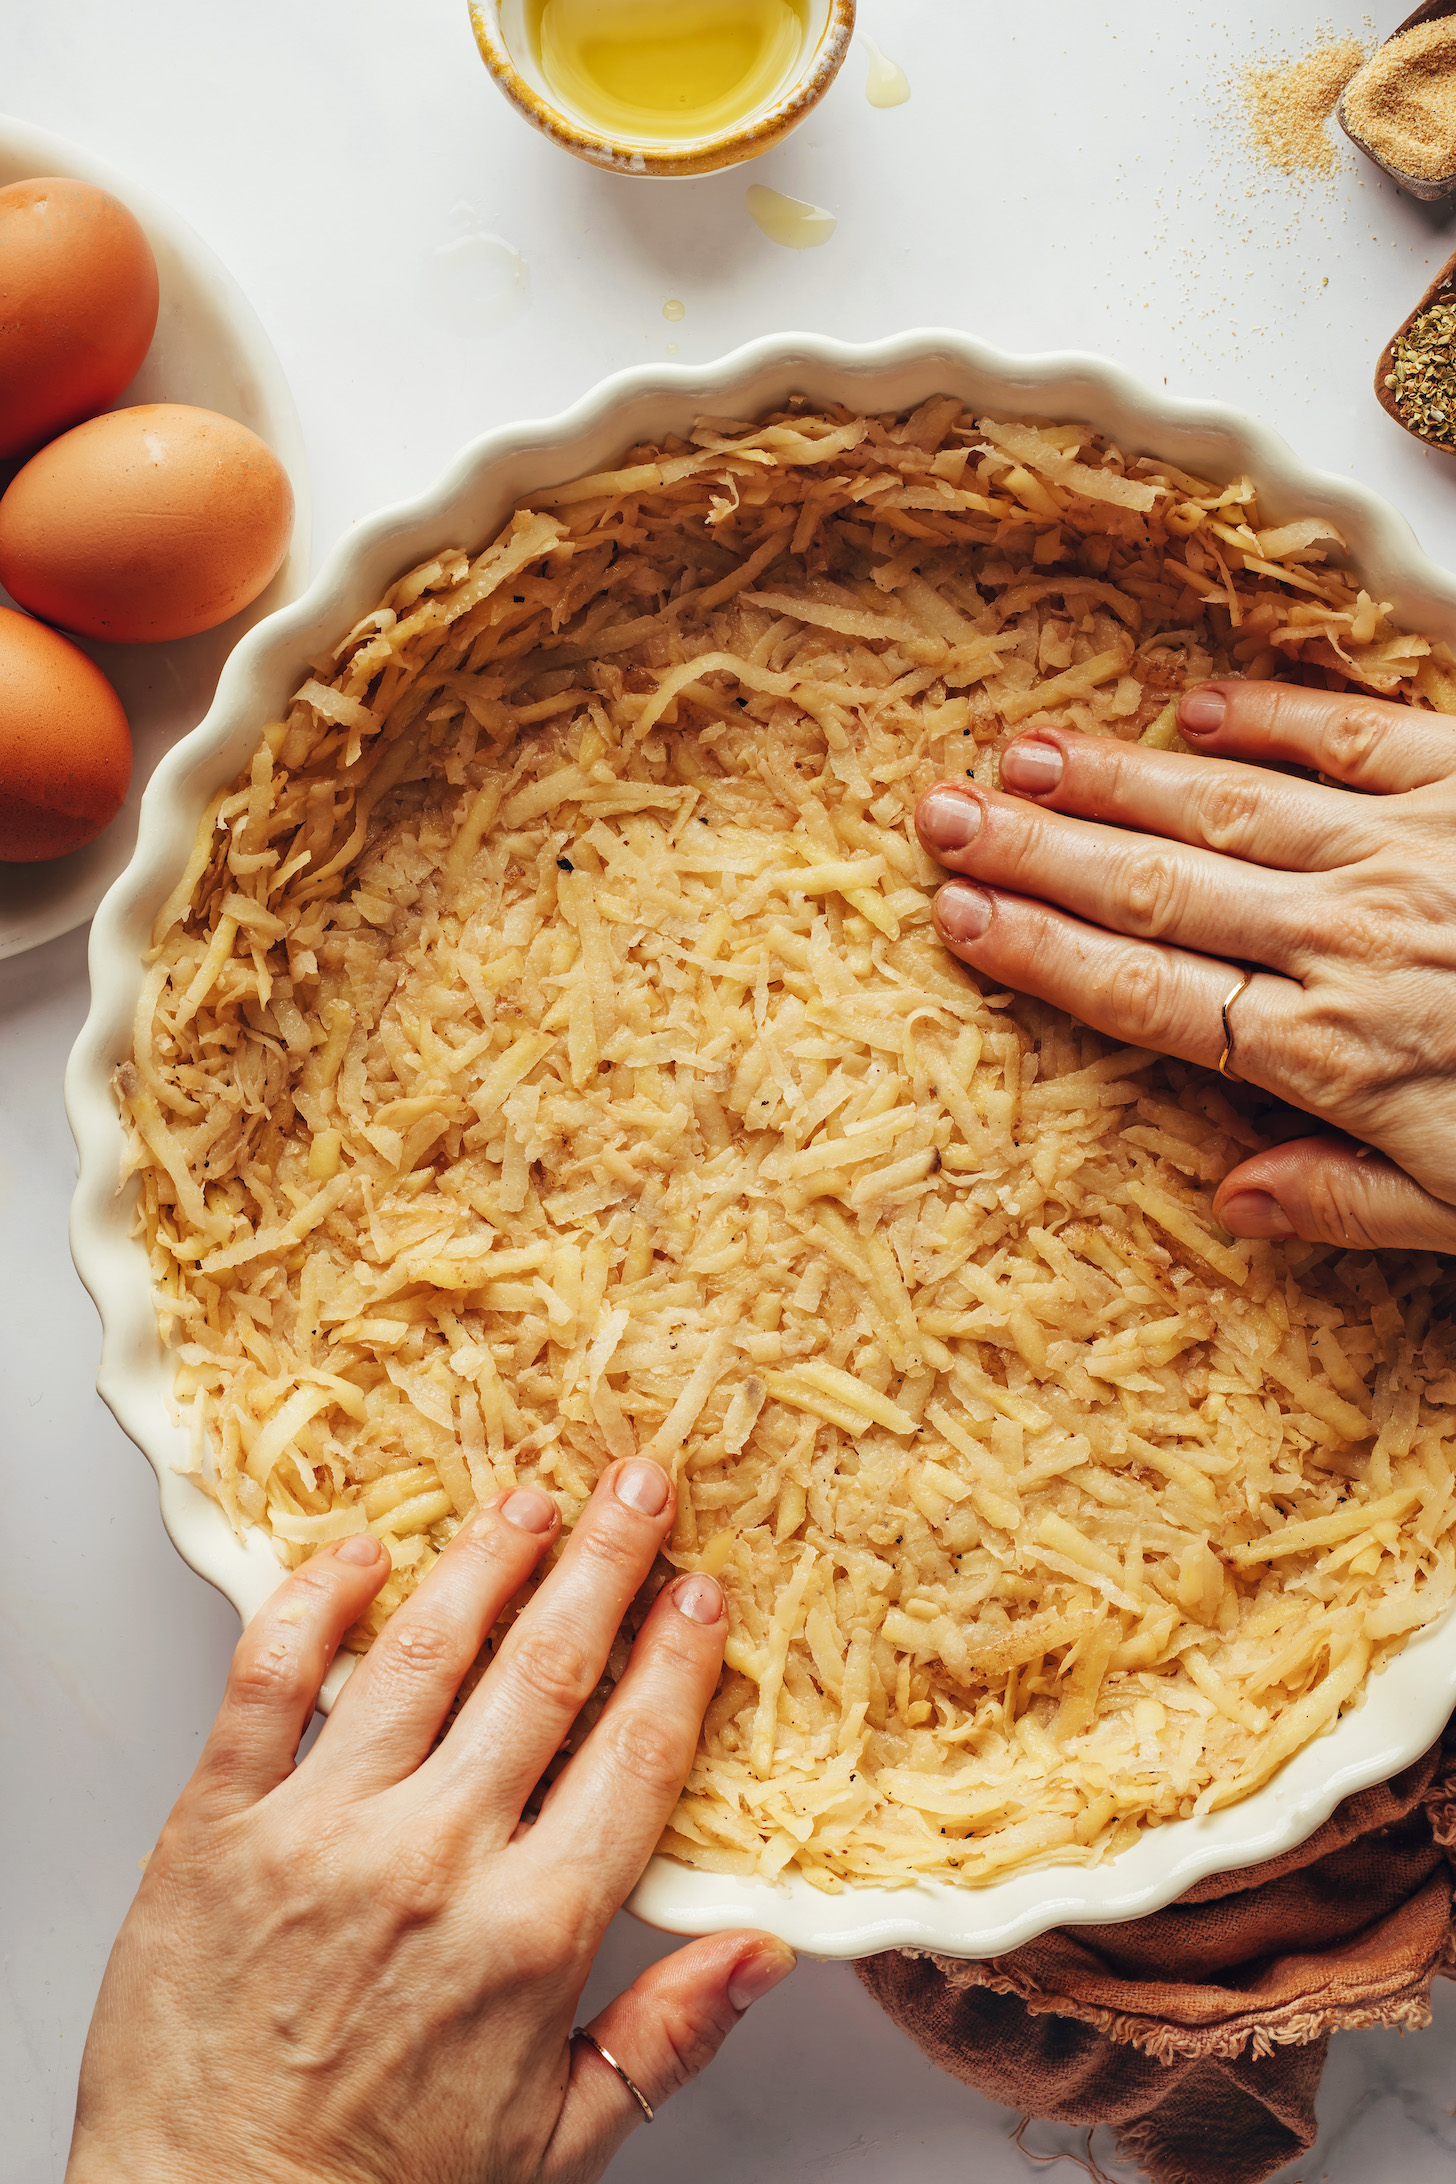 Shredded potatoes are required for a potato crust quiche. Yukon gold retains its color better than russet, which grays more rapidly, thus we prefer them. We mix the potatoes with olive oil, salt, and pepper before pressing them equally into a pie pan after pressing the extra moisture from the potatoes.